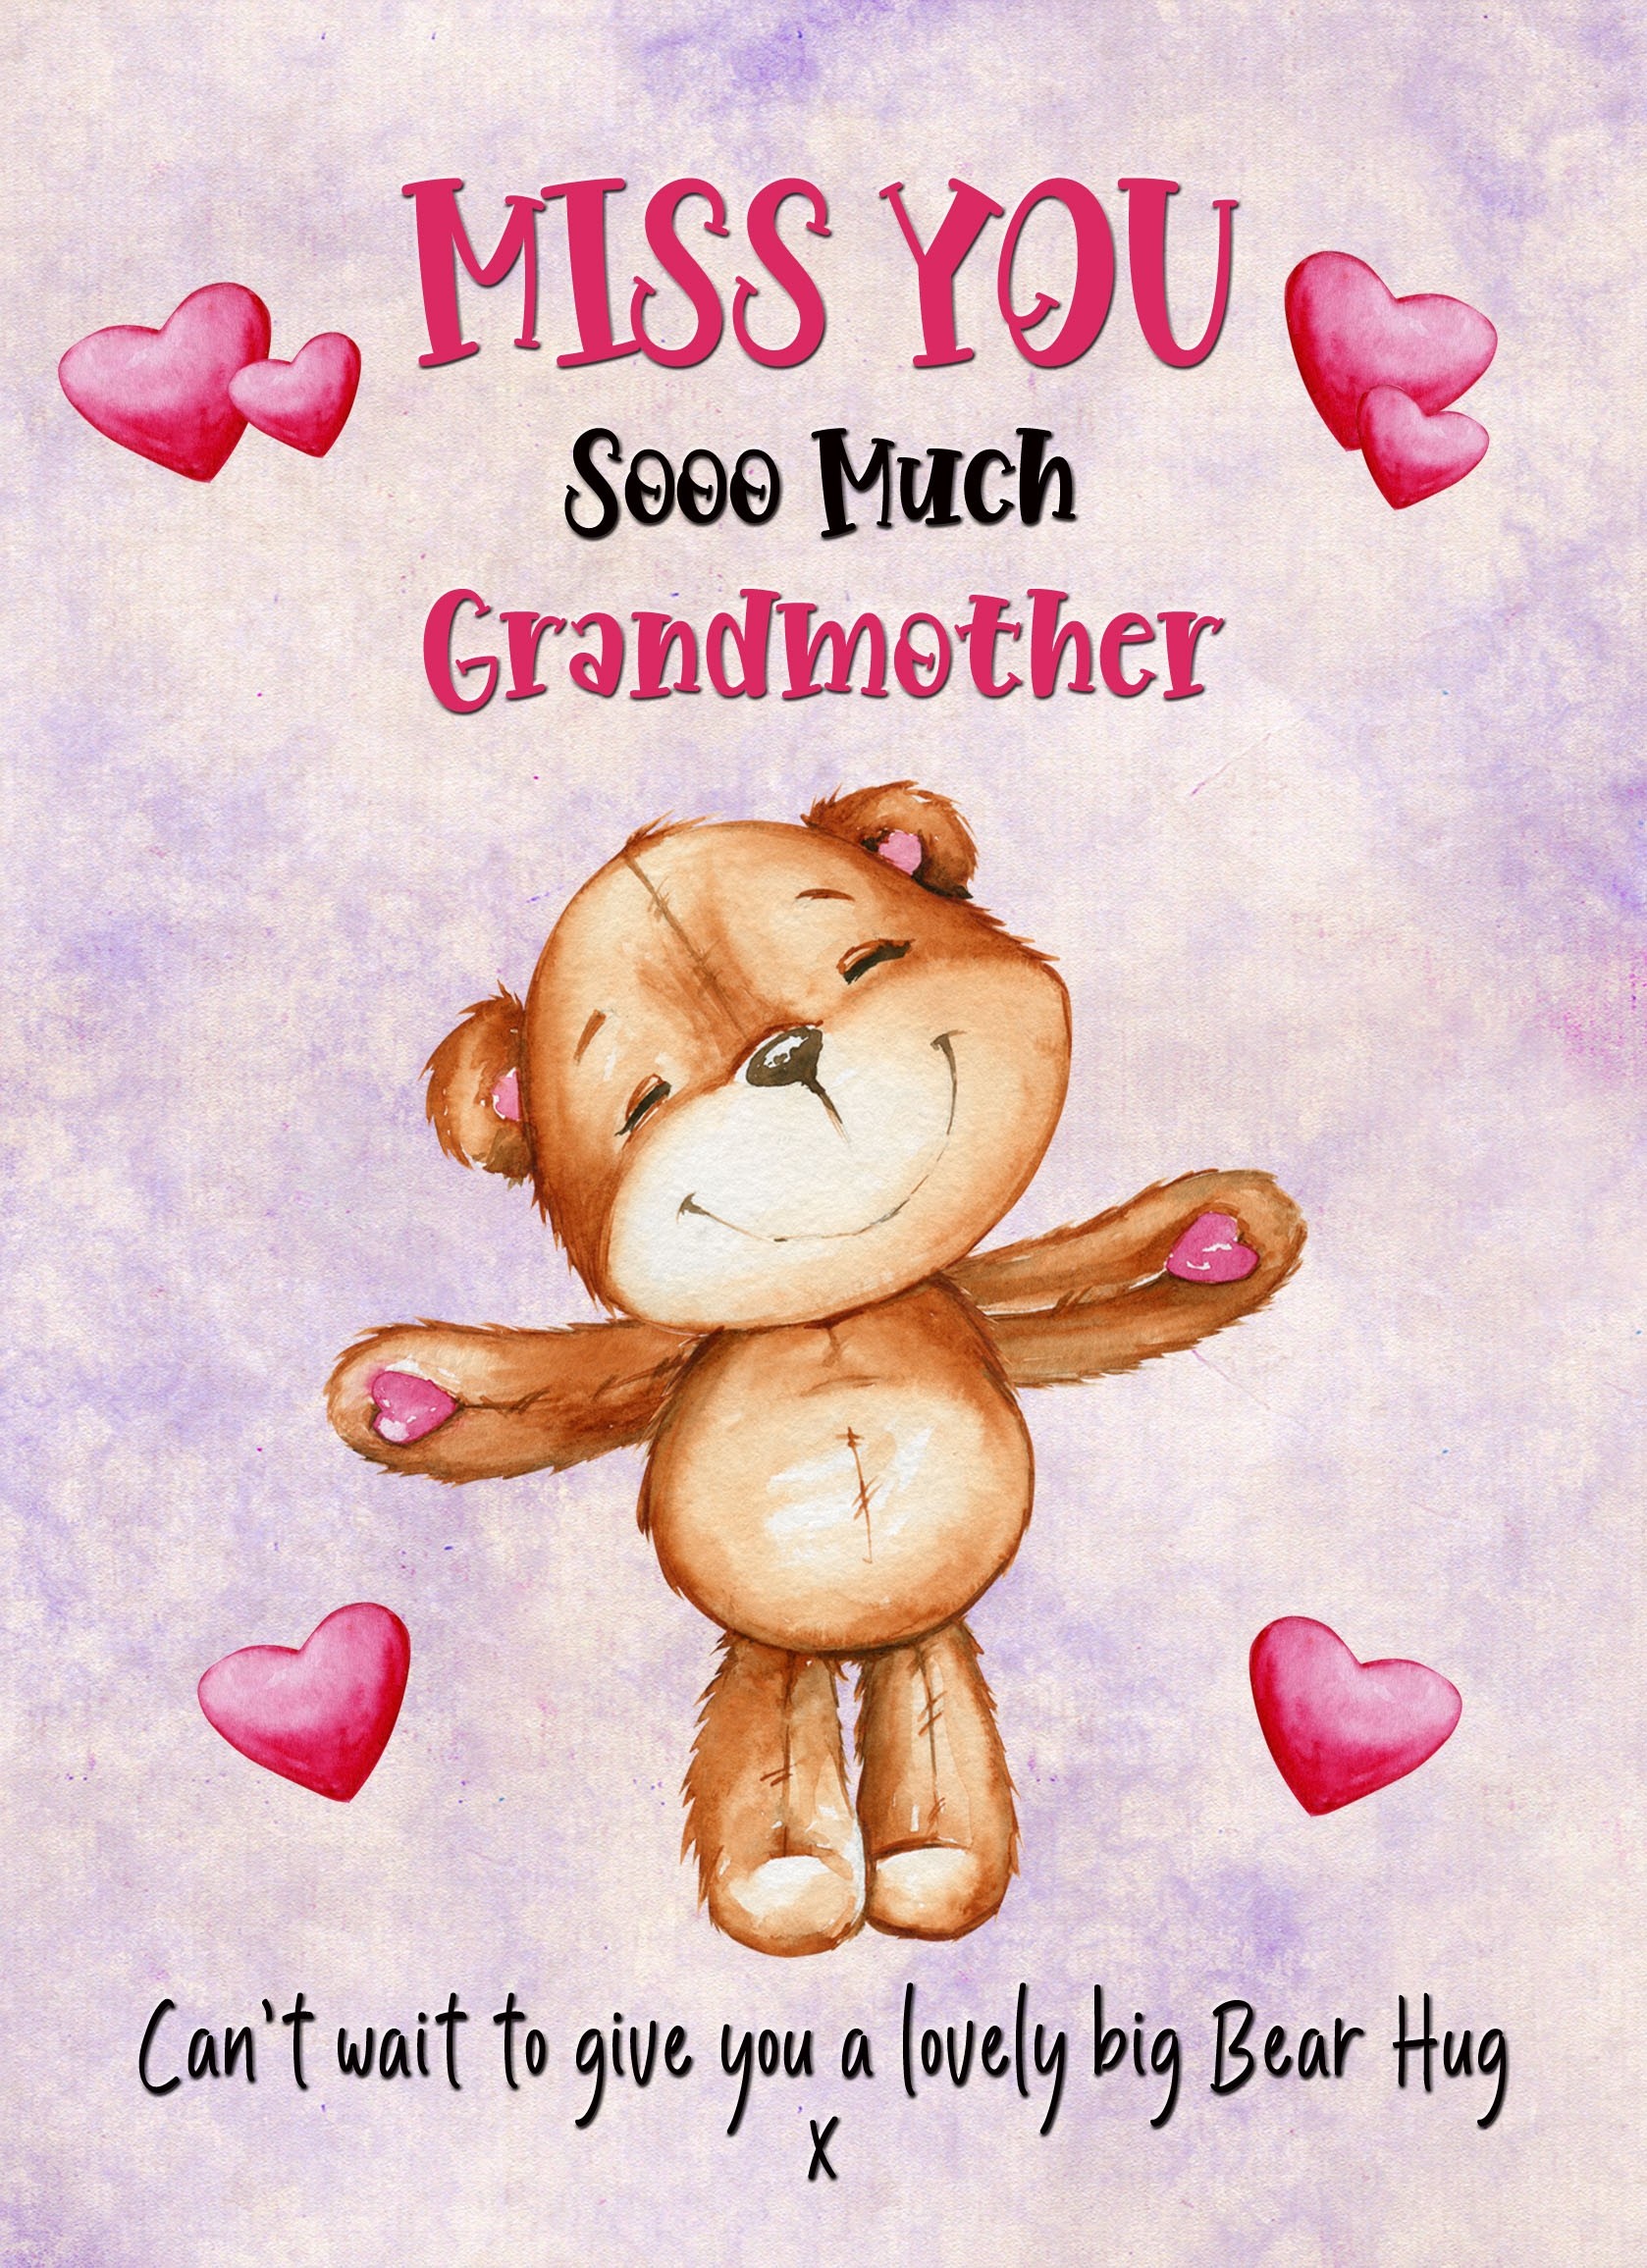 Missing You Card For Grandmother (Hearts)